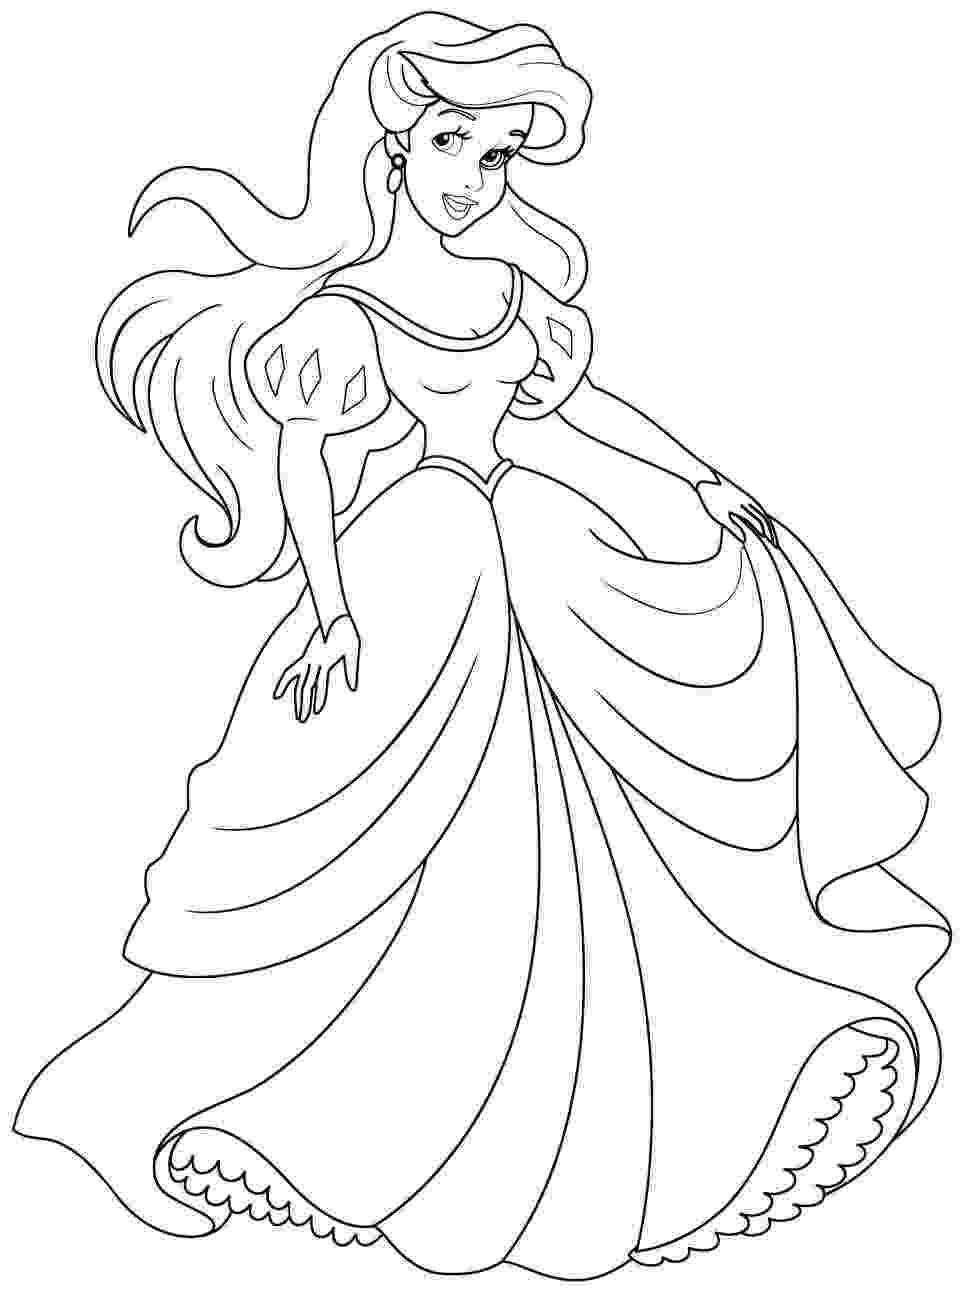 disney ariel coloring pages ariel coloring pages to download and print for free disney coloring pages ariel 